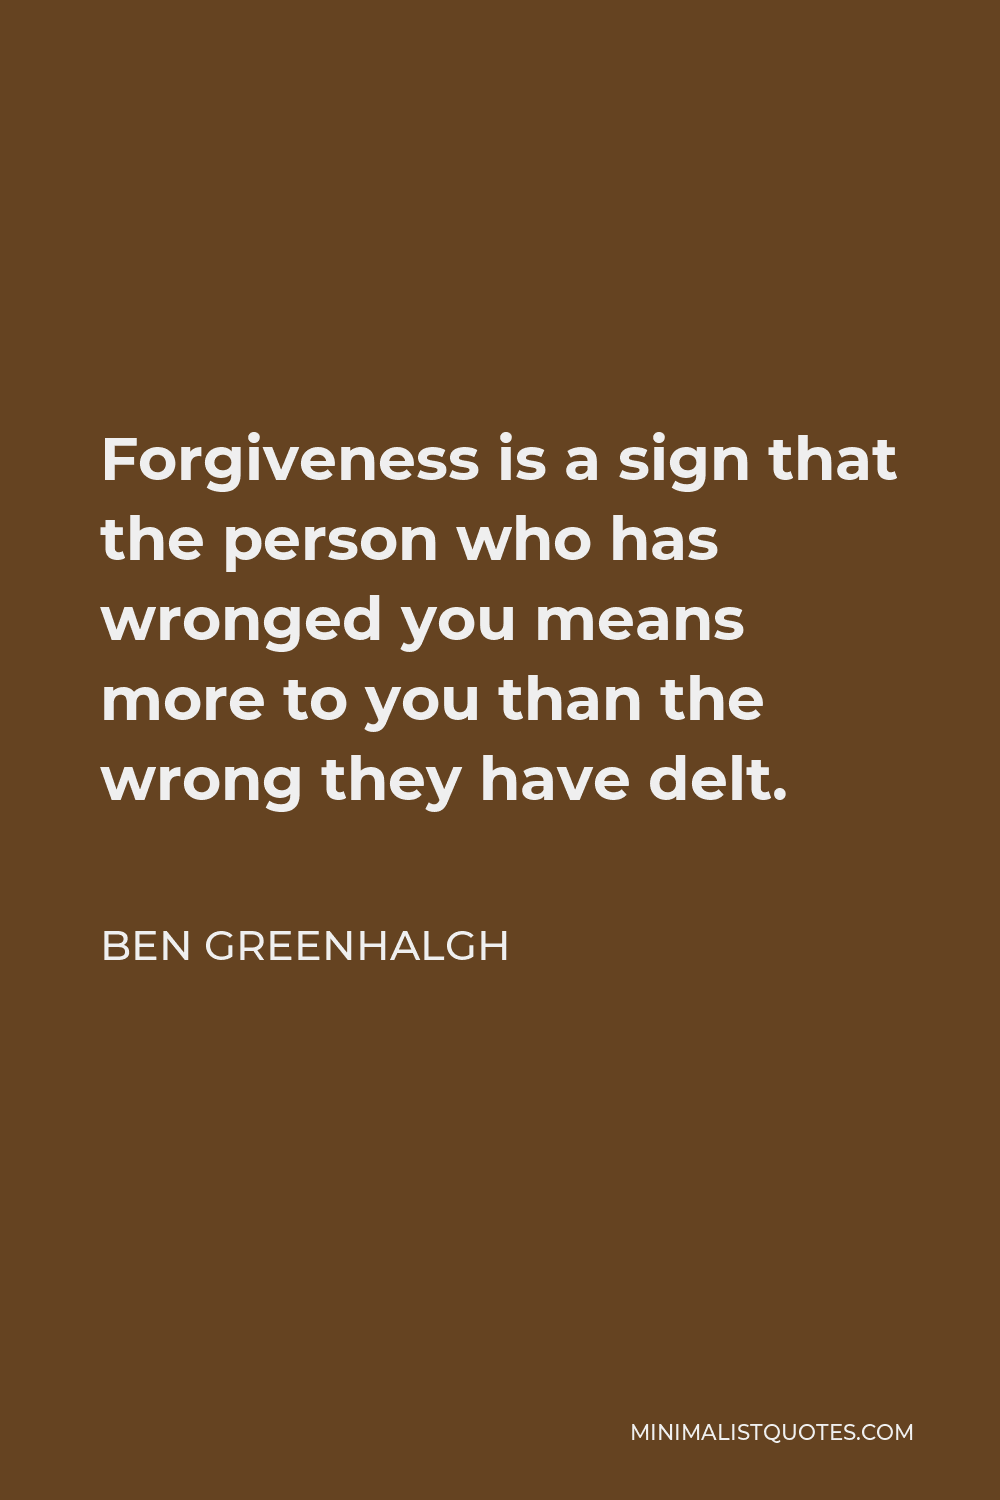 Ben Greenhalgh Quote - Forgiveness is a sign that the person who has wronged you means more to you than the wrong they have delt.